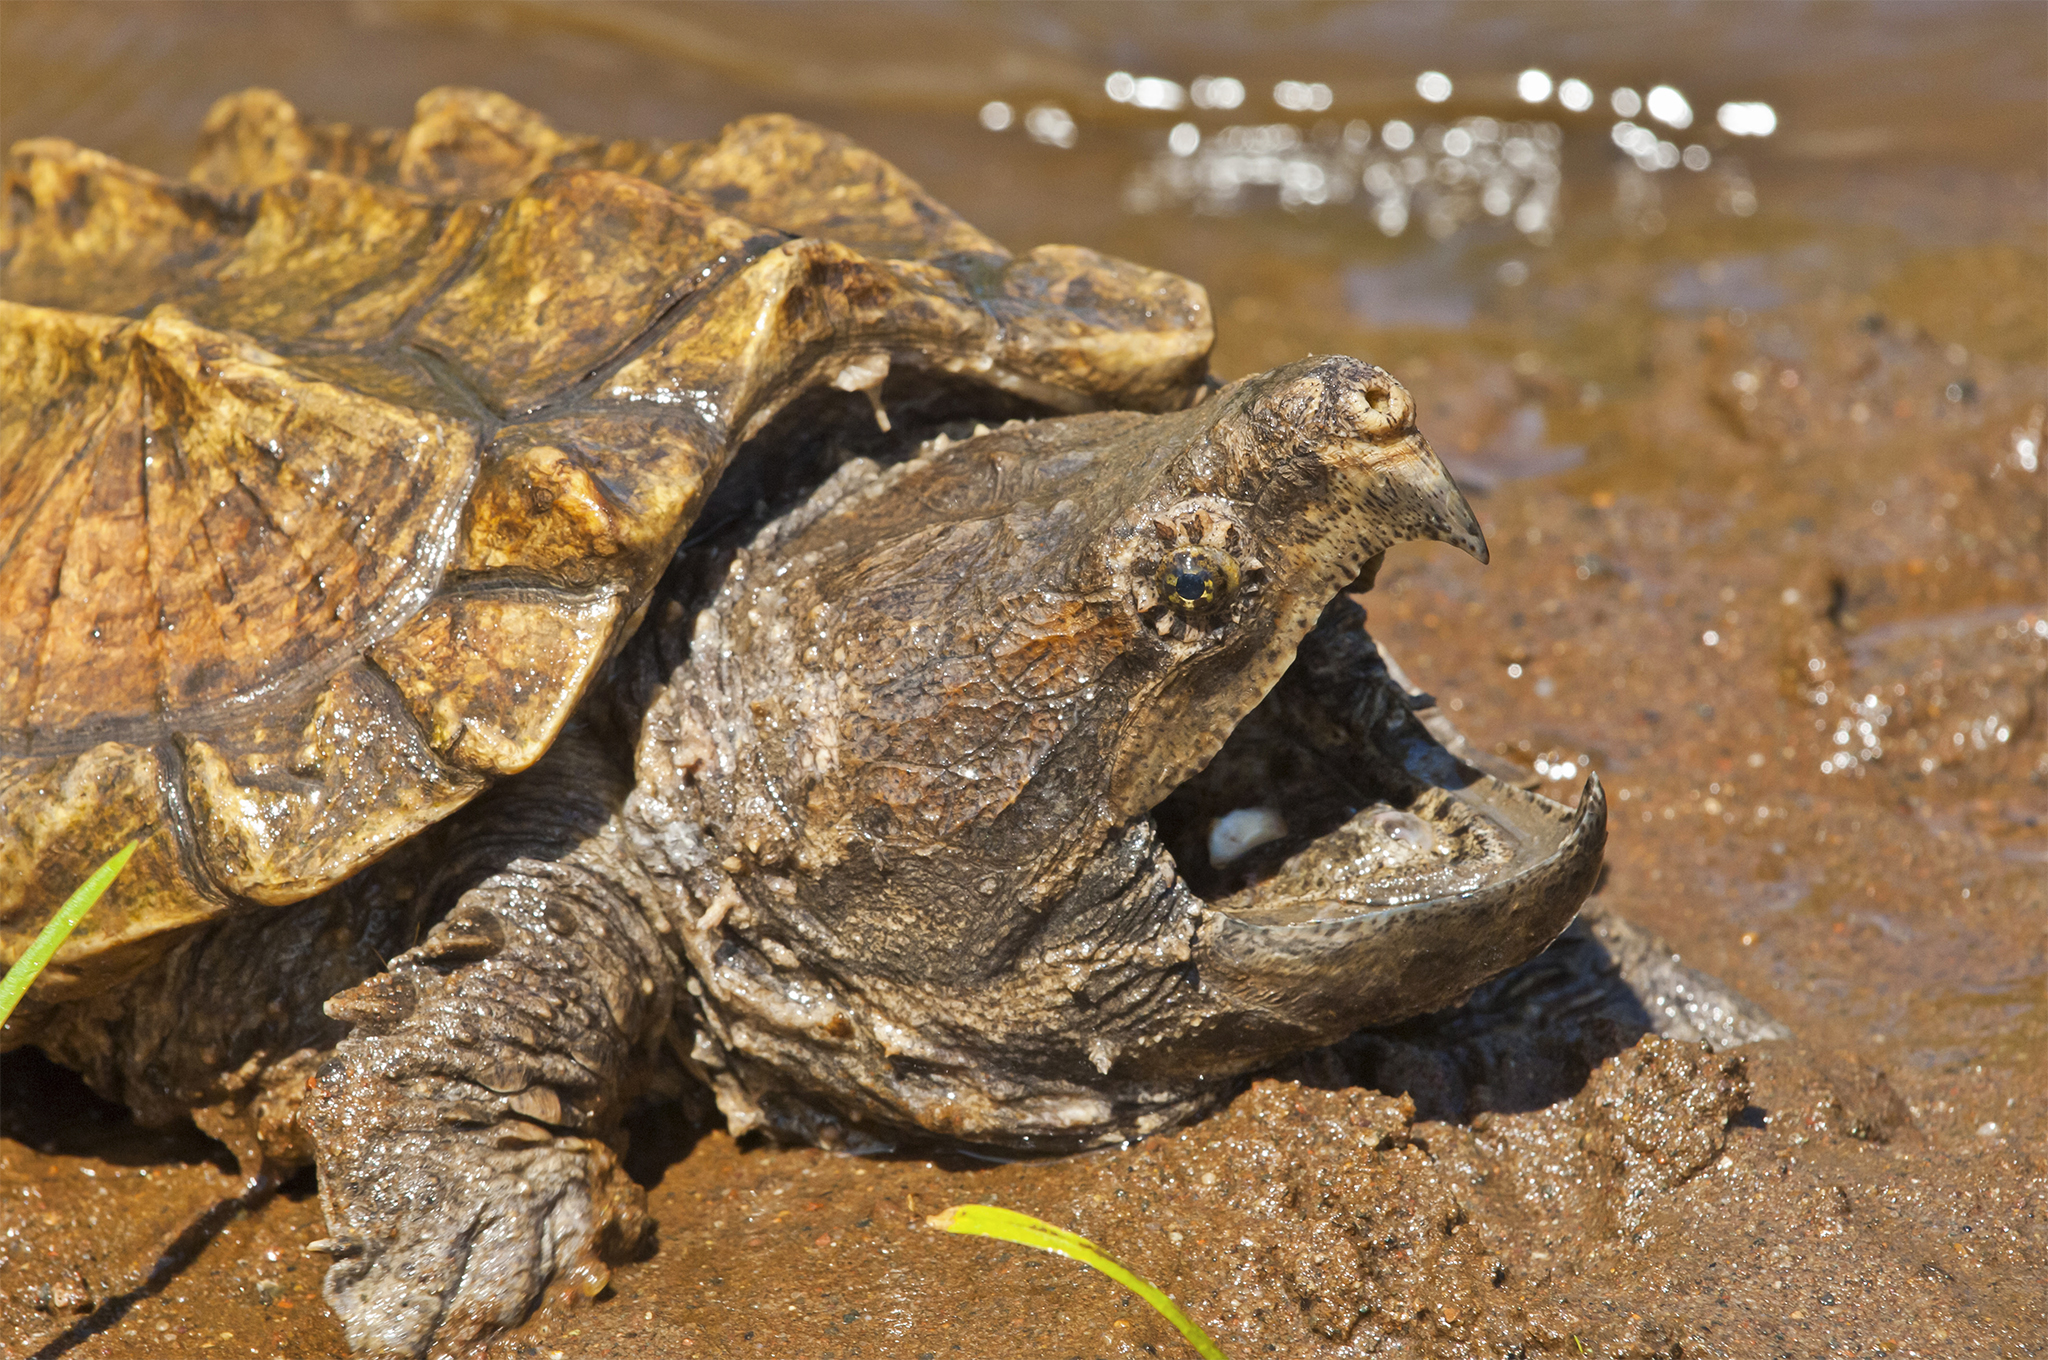 Two New Snapping Turtle Species Named | National Geographic (blogs)